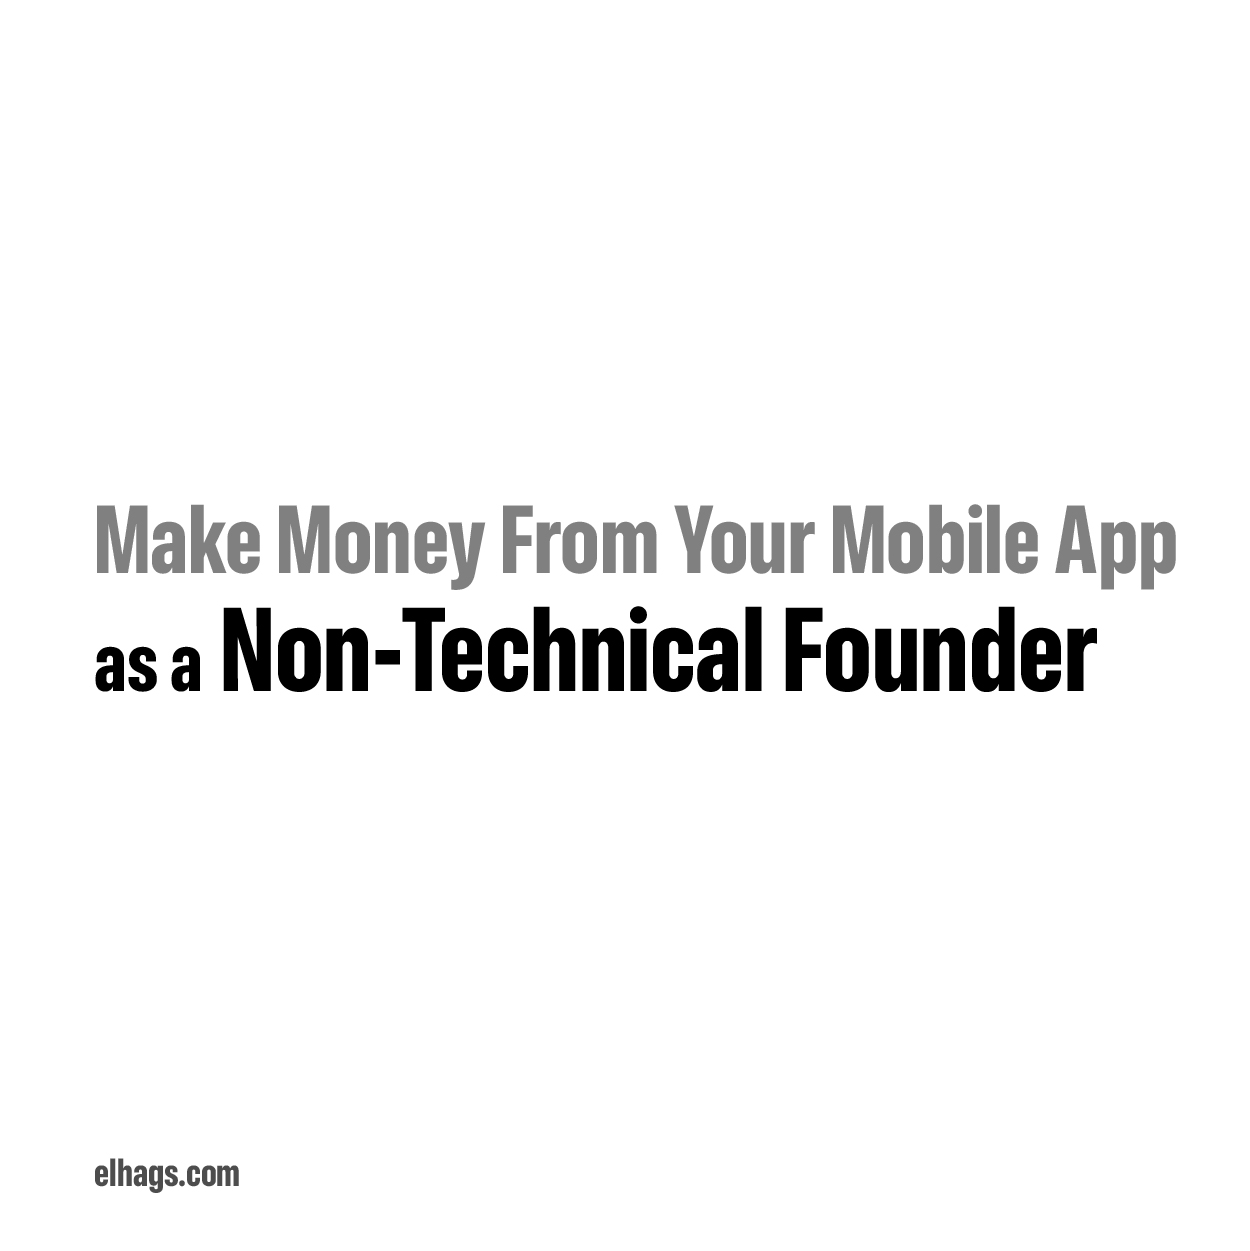 10 Ways to Make Money From Your Mobile App (With Examples)